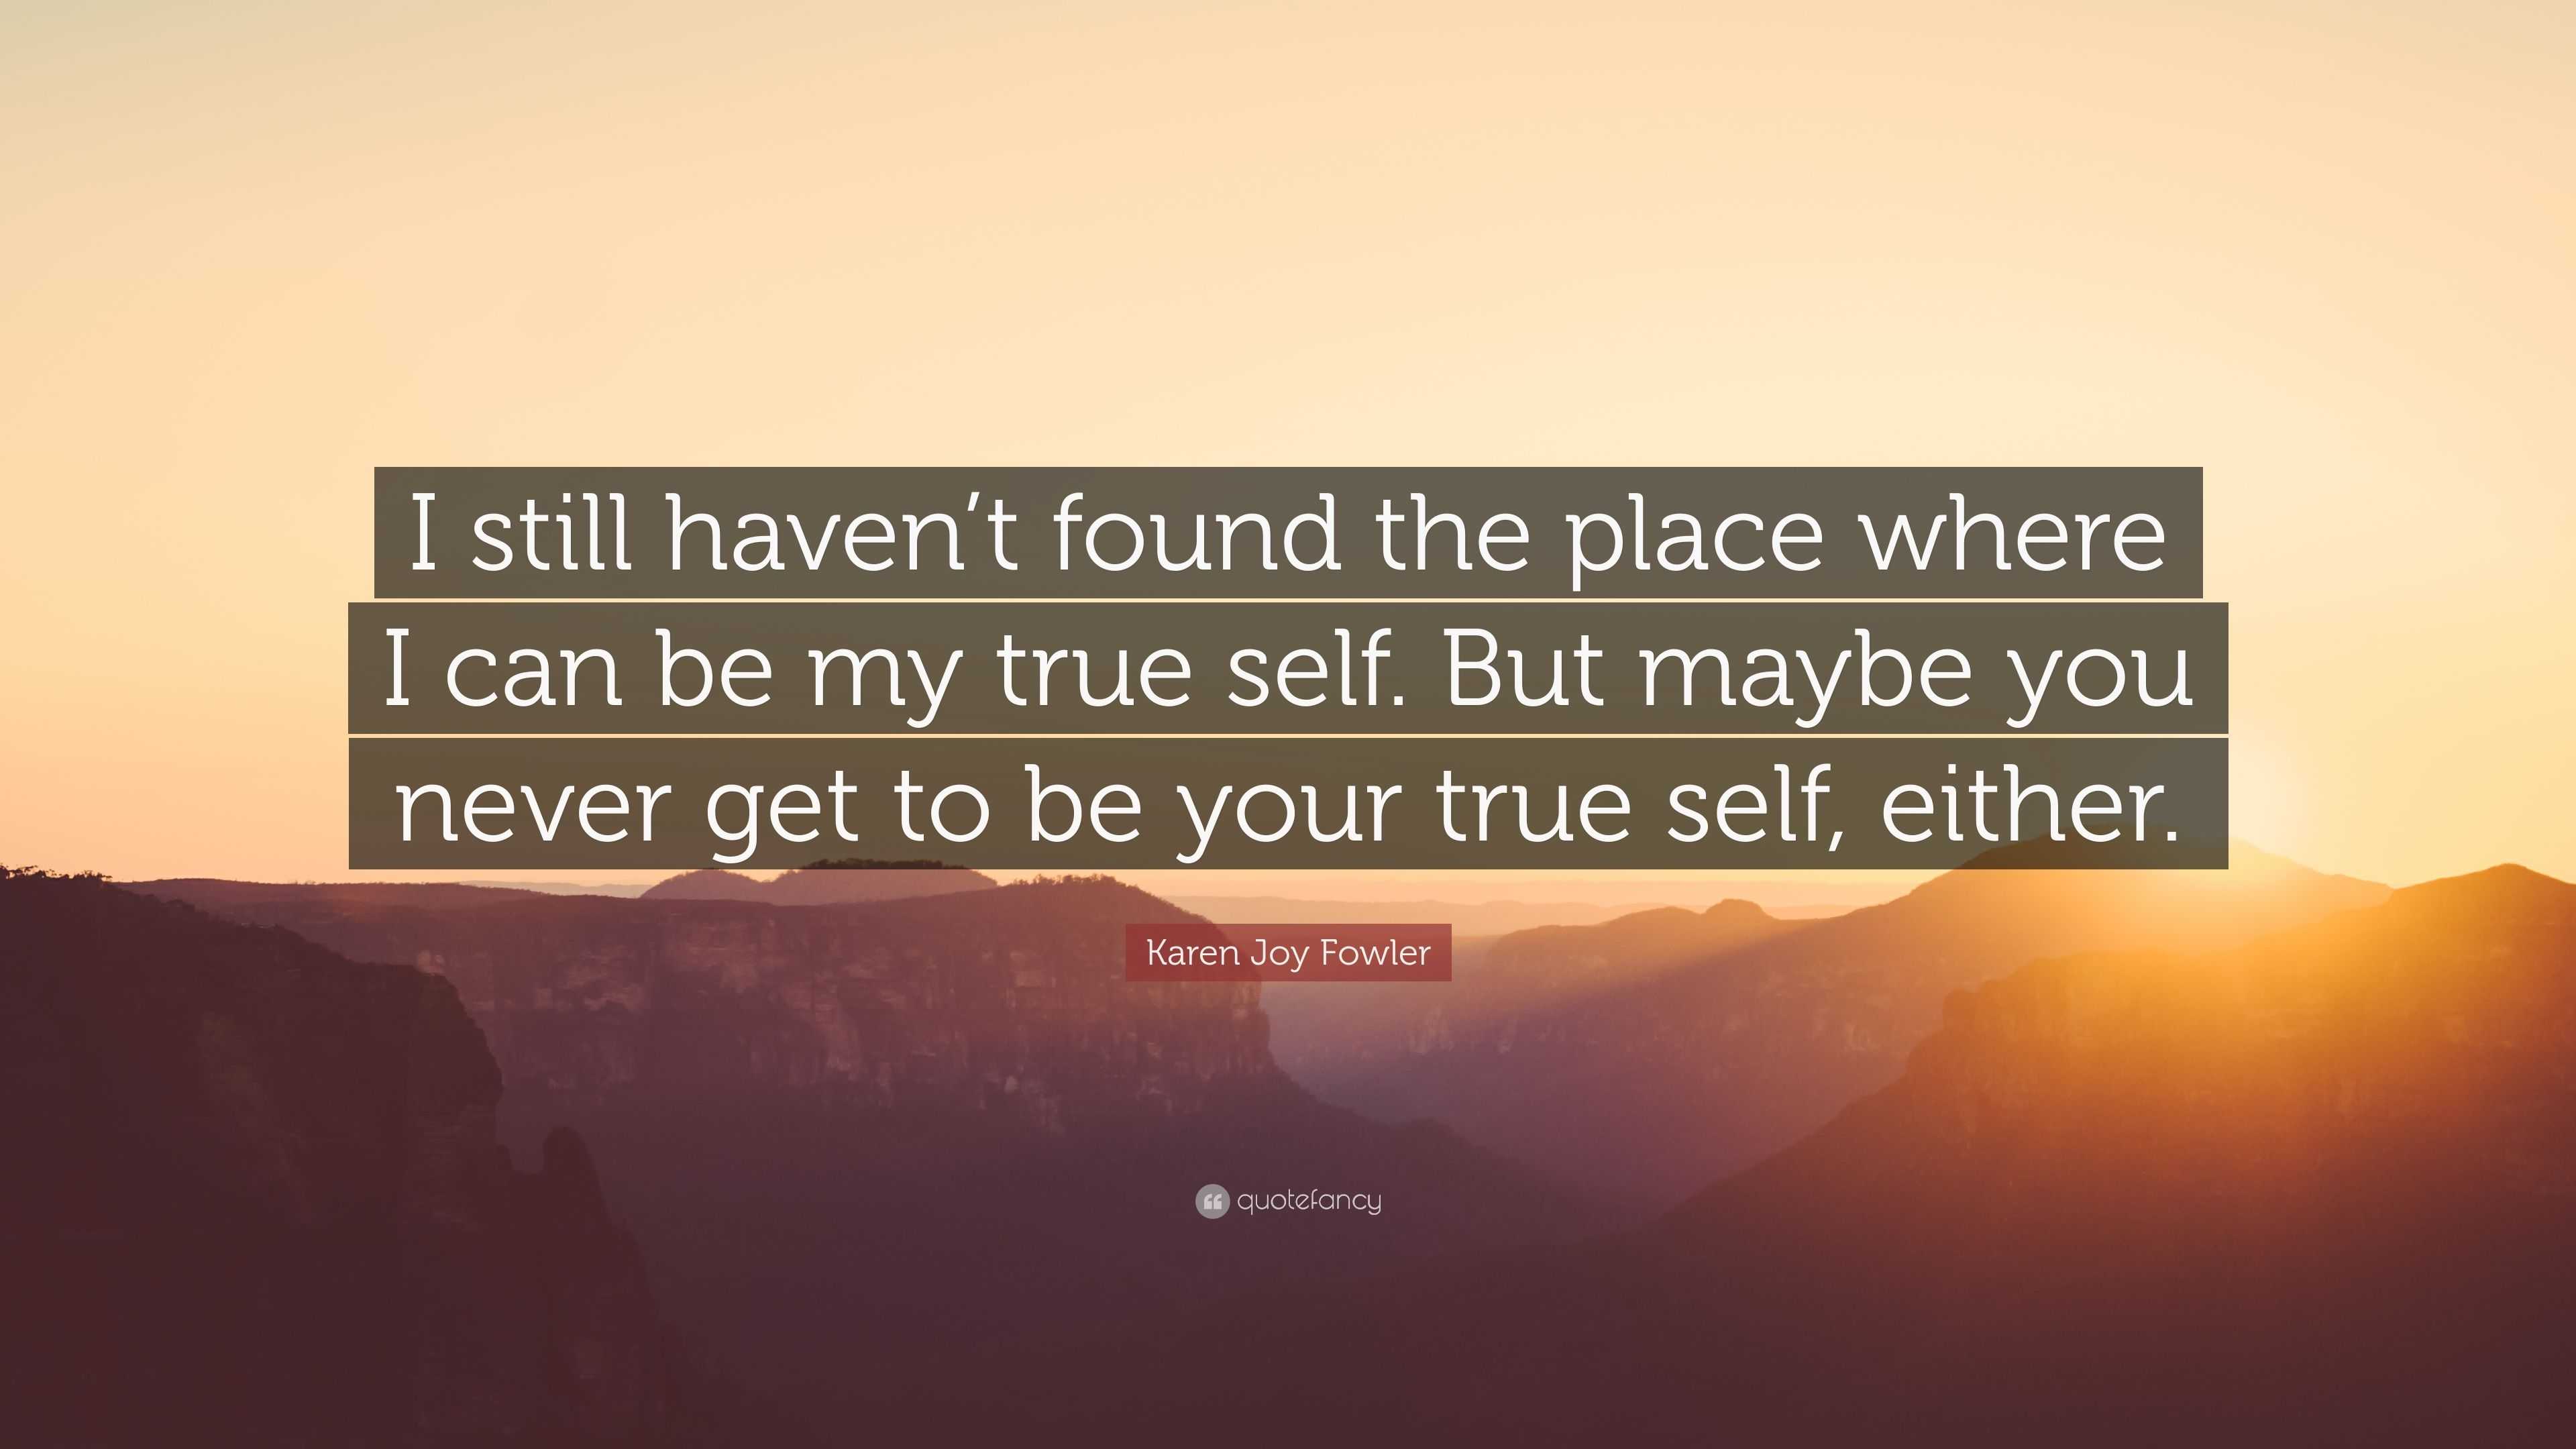 Karen Joy Fowler Quote: “I still haven’t found the place where I can be ...